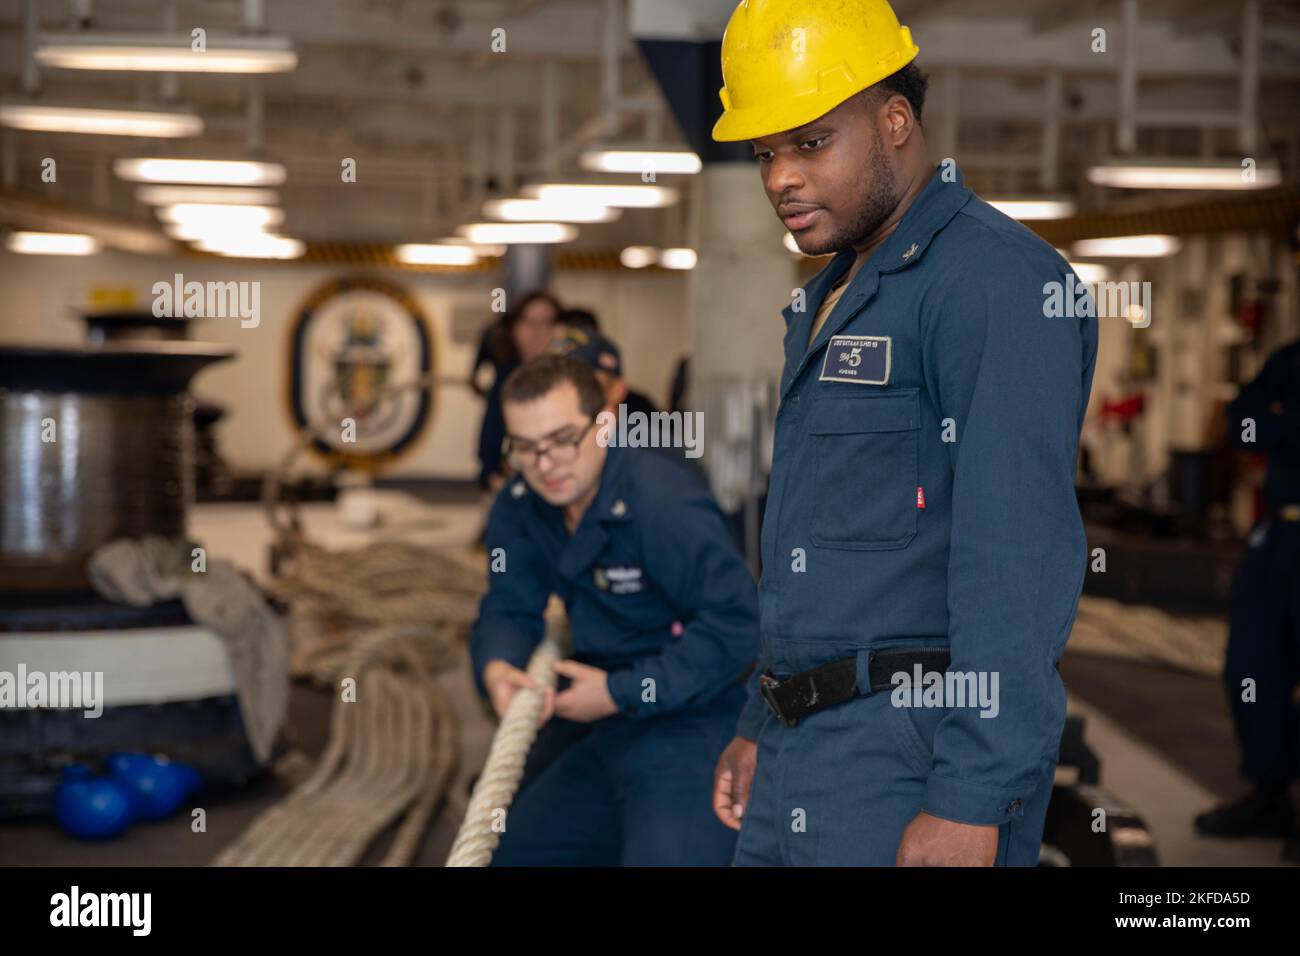 220908-N-VO895-1055  ATLANTIC OCEAN (Sept. 8, 2022) Boatswain’s Mate 3rd Class Benjamin Hughes, assigned to the Wasp-class amphibious assault ship USS Bataan (LHD 5) Deck Department, ensures lines are heaved in, in the ship’s forecastle, Sept. 8, 2022. Bataan is underway conducting an Afloat Training Group engineering inspection as part of the basic phase training cycle. Stock Photo